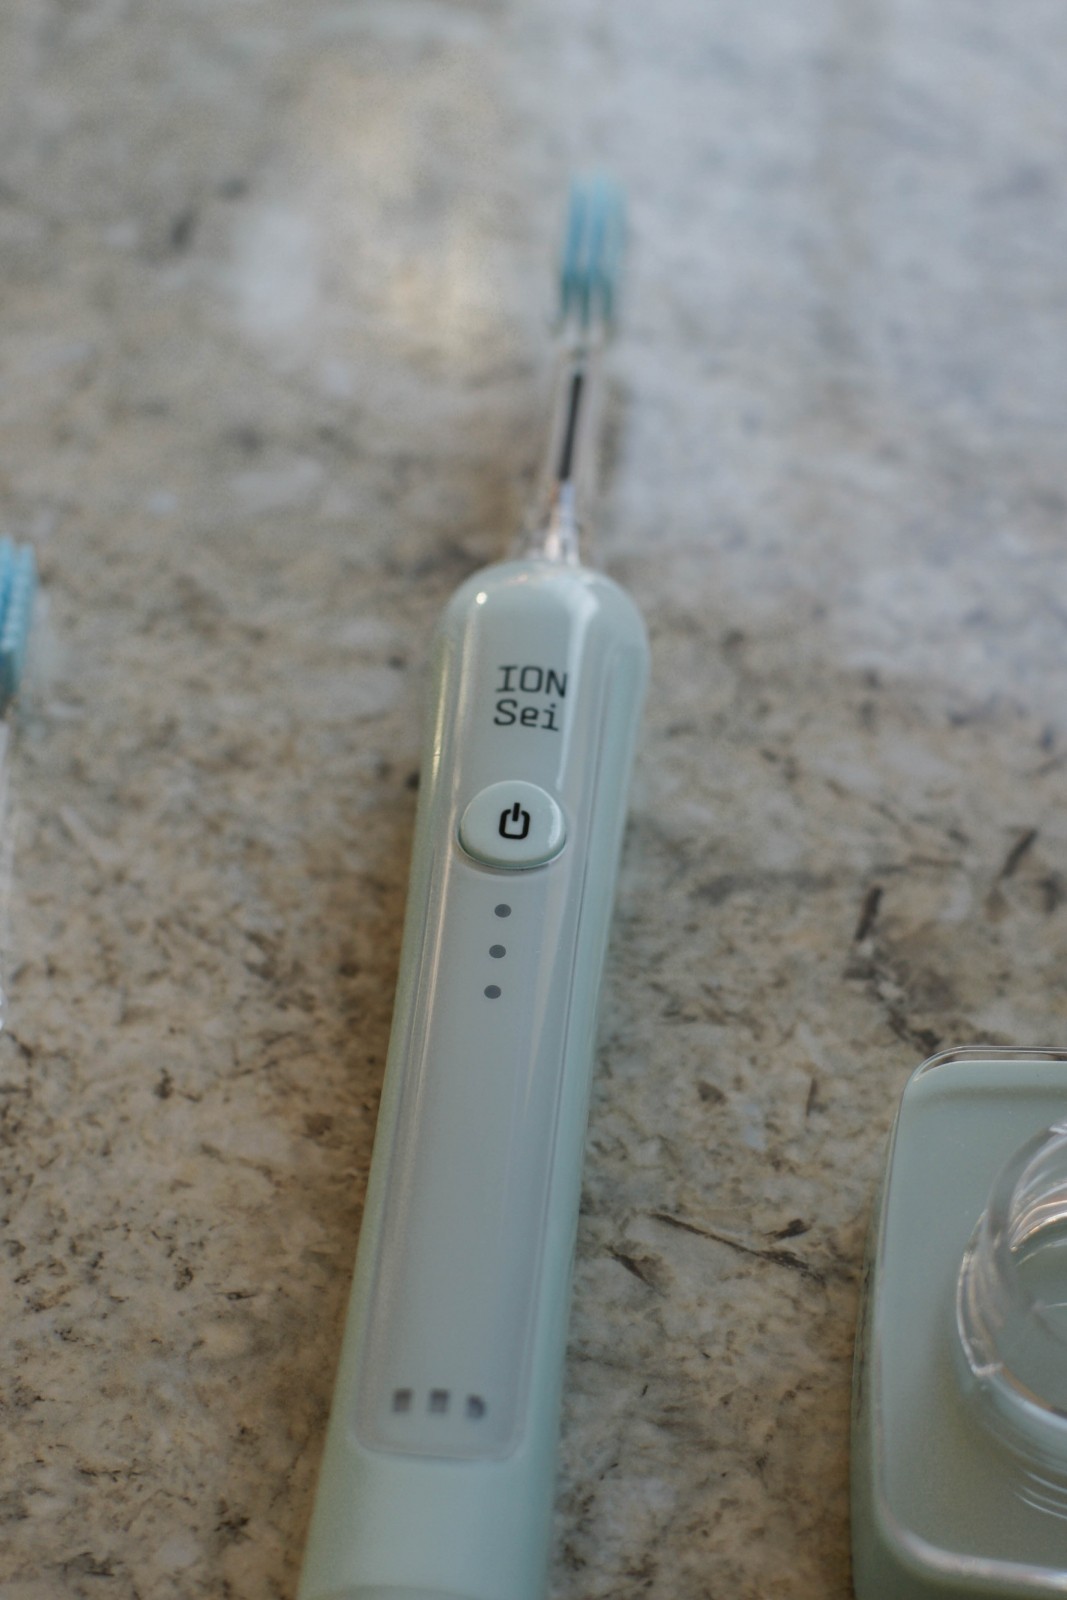 ION-Sei Electric Toothbrush Product Review